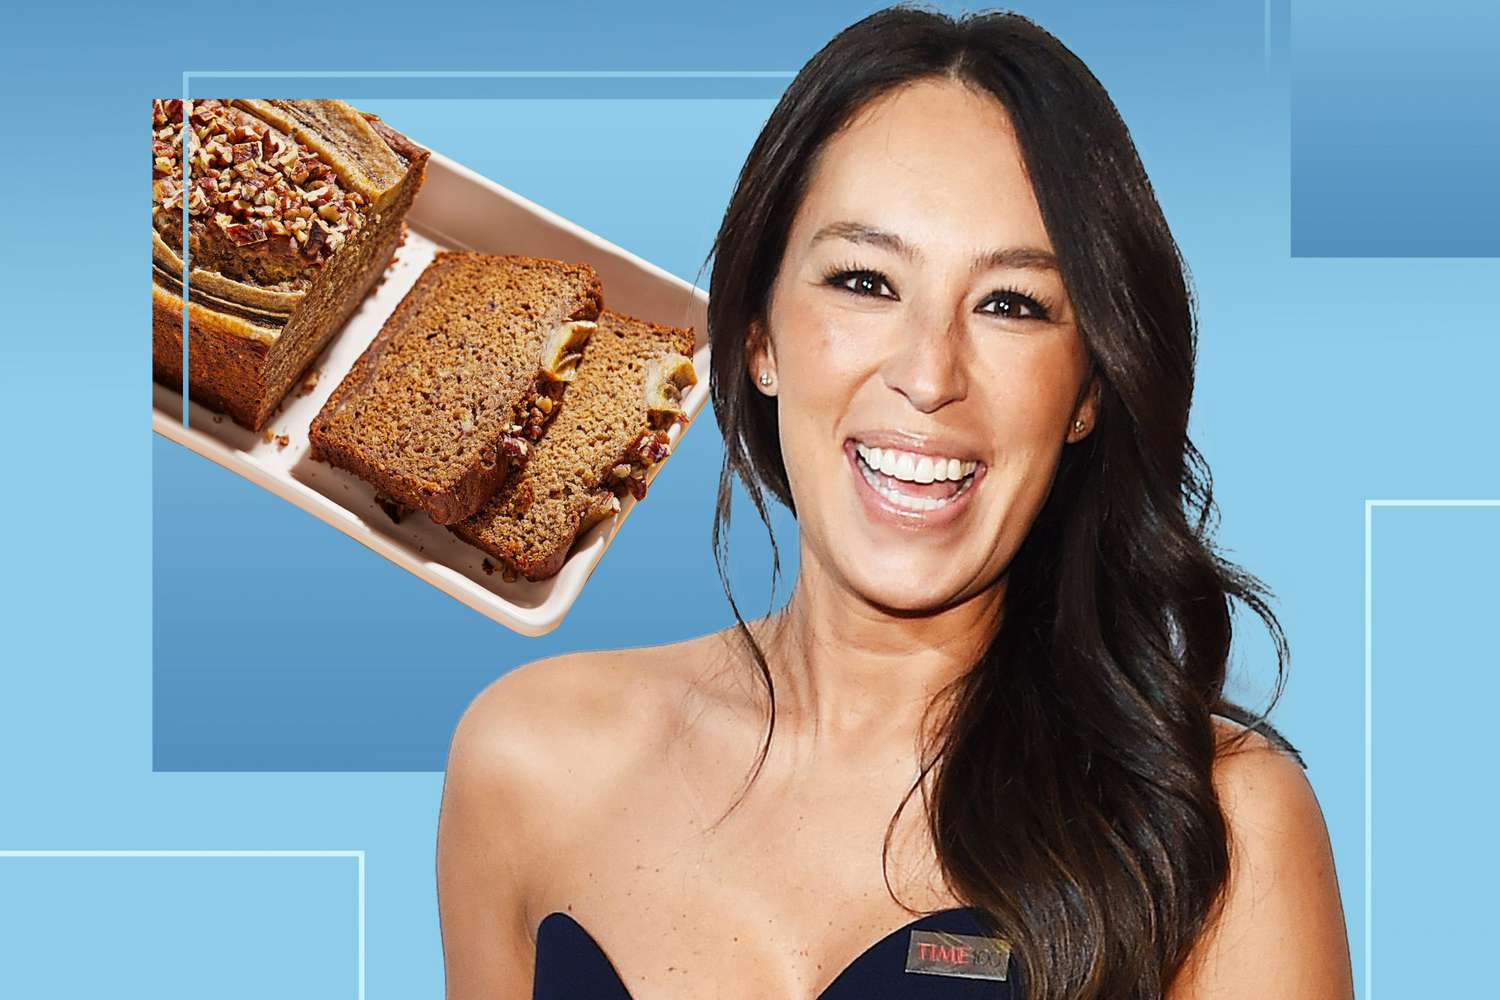 Joanna-Gaines'-Easy-Banana-Bread-Is-Seriously-The-Best-Banana-Bread-Ever-According-to-One-Fan-GettyImages-1144675488-1198467629